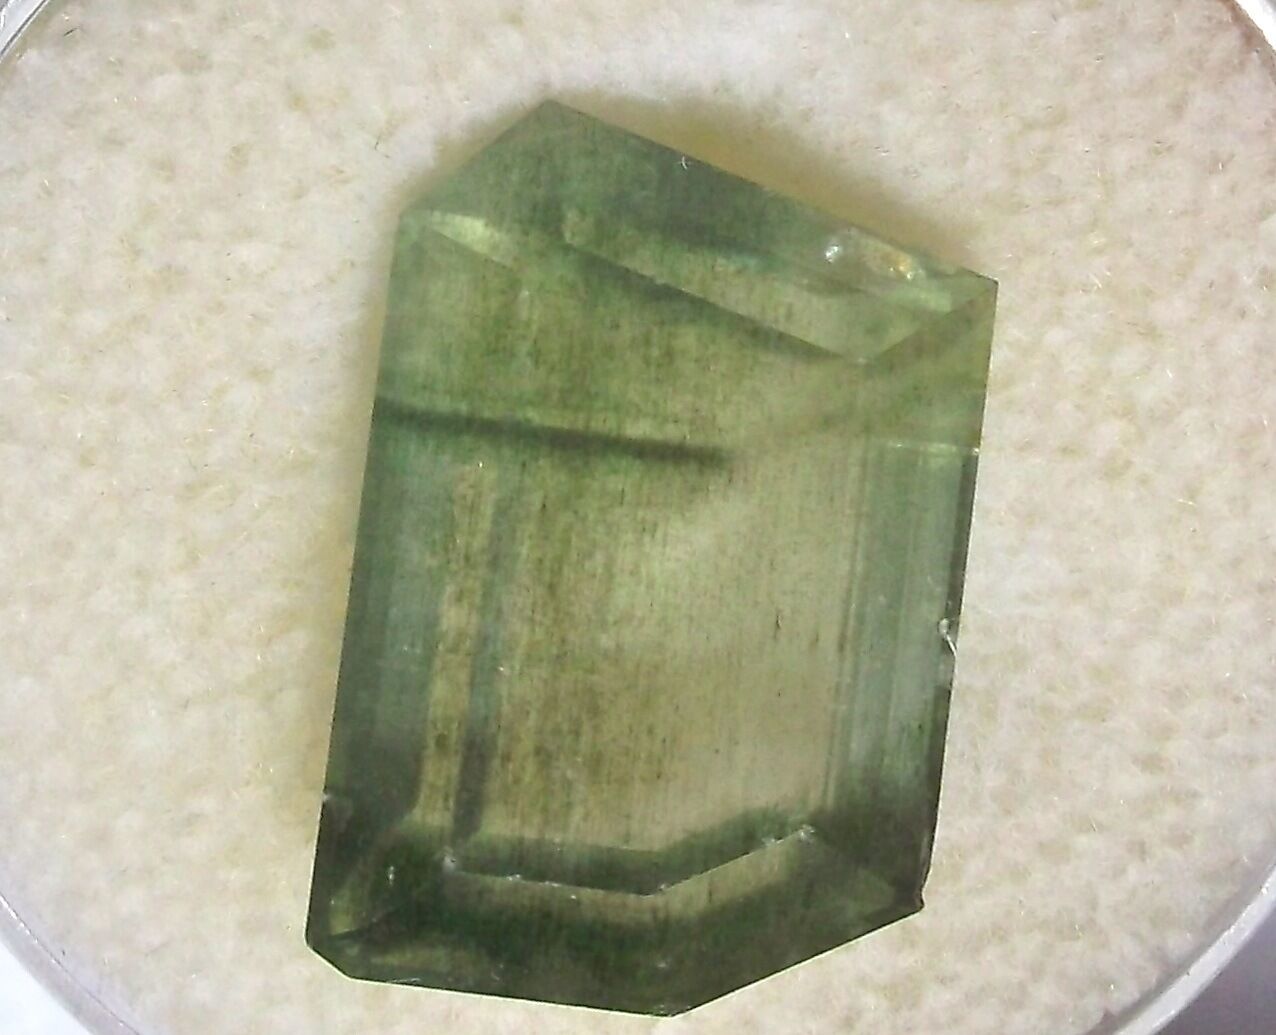 GREEN BERYL CLEAR FACETED CRYSTAL 15.5 CARATS OR 3.1 GRAMS BRAZIL